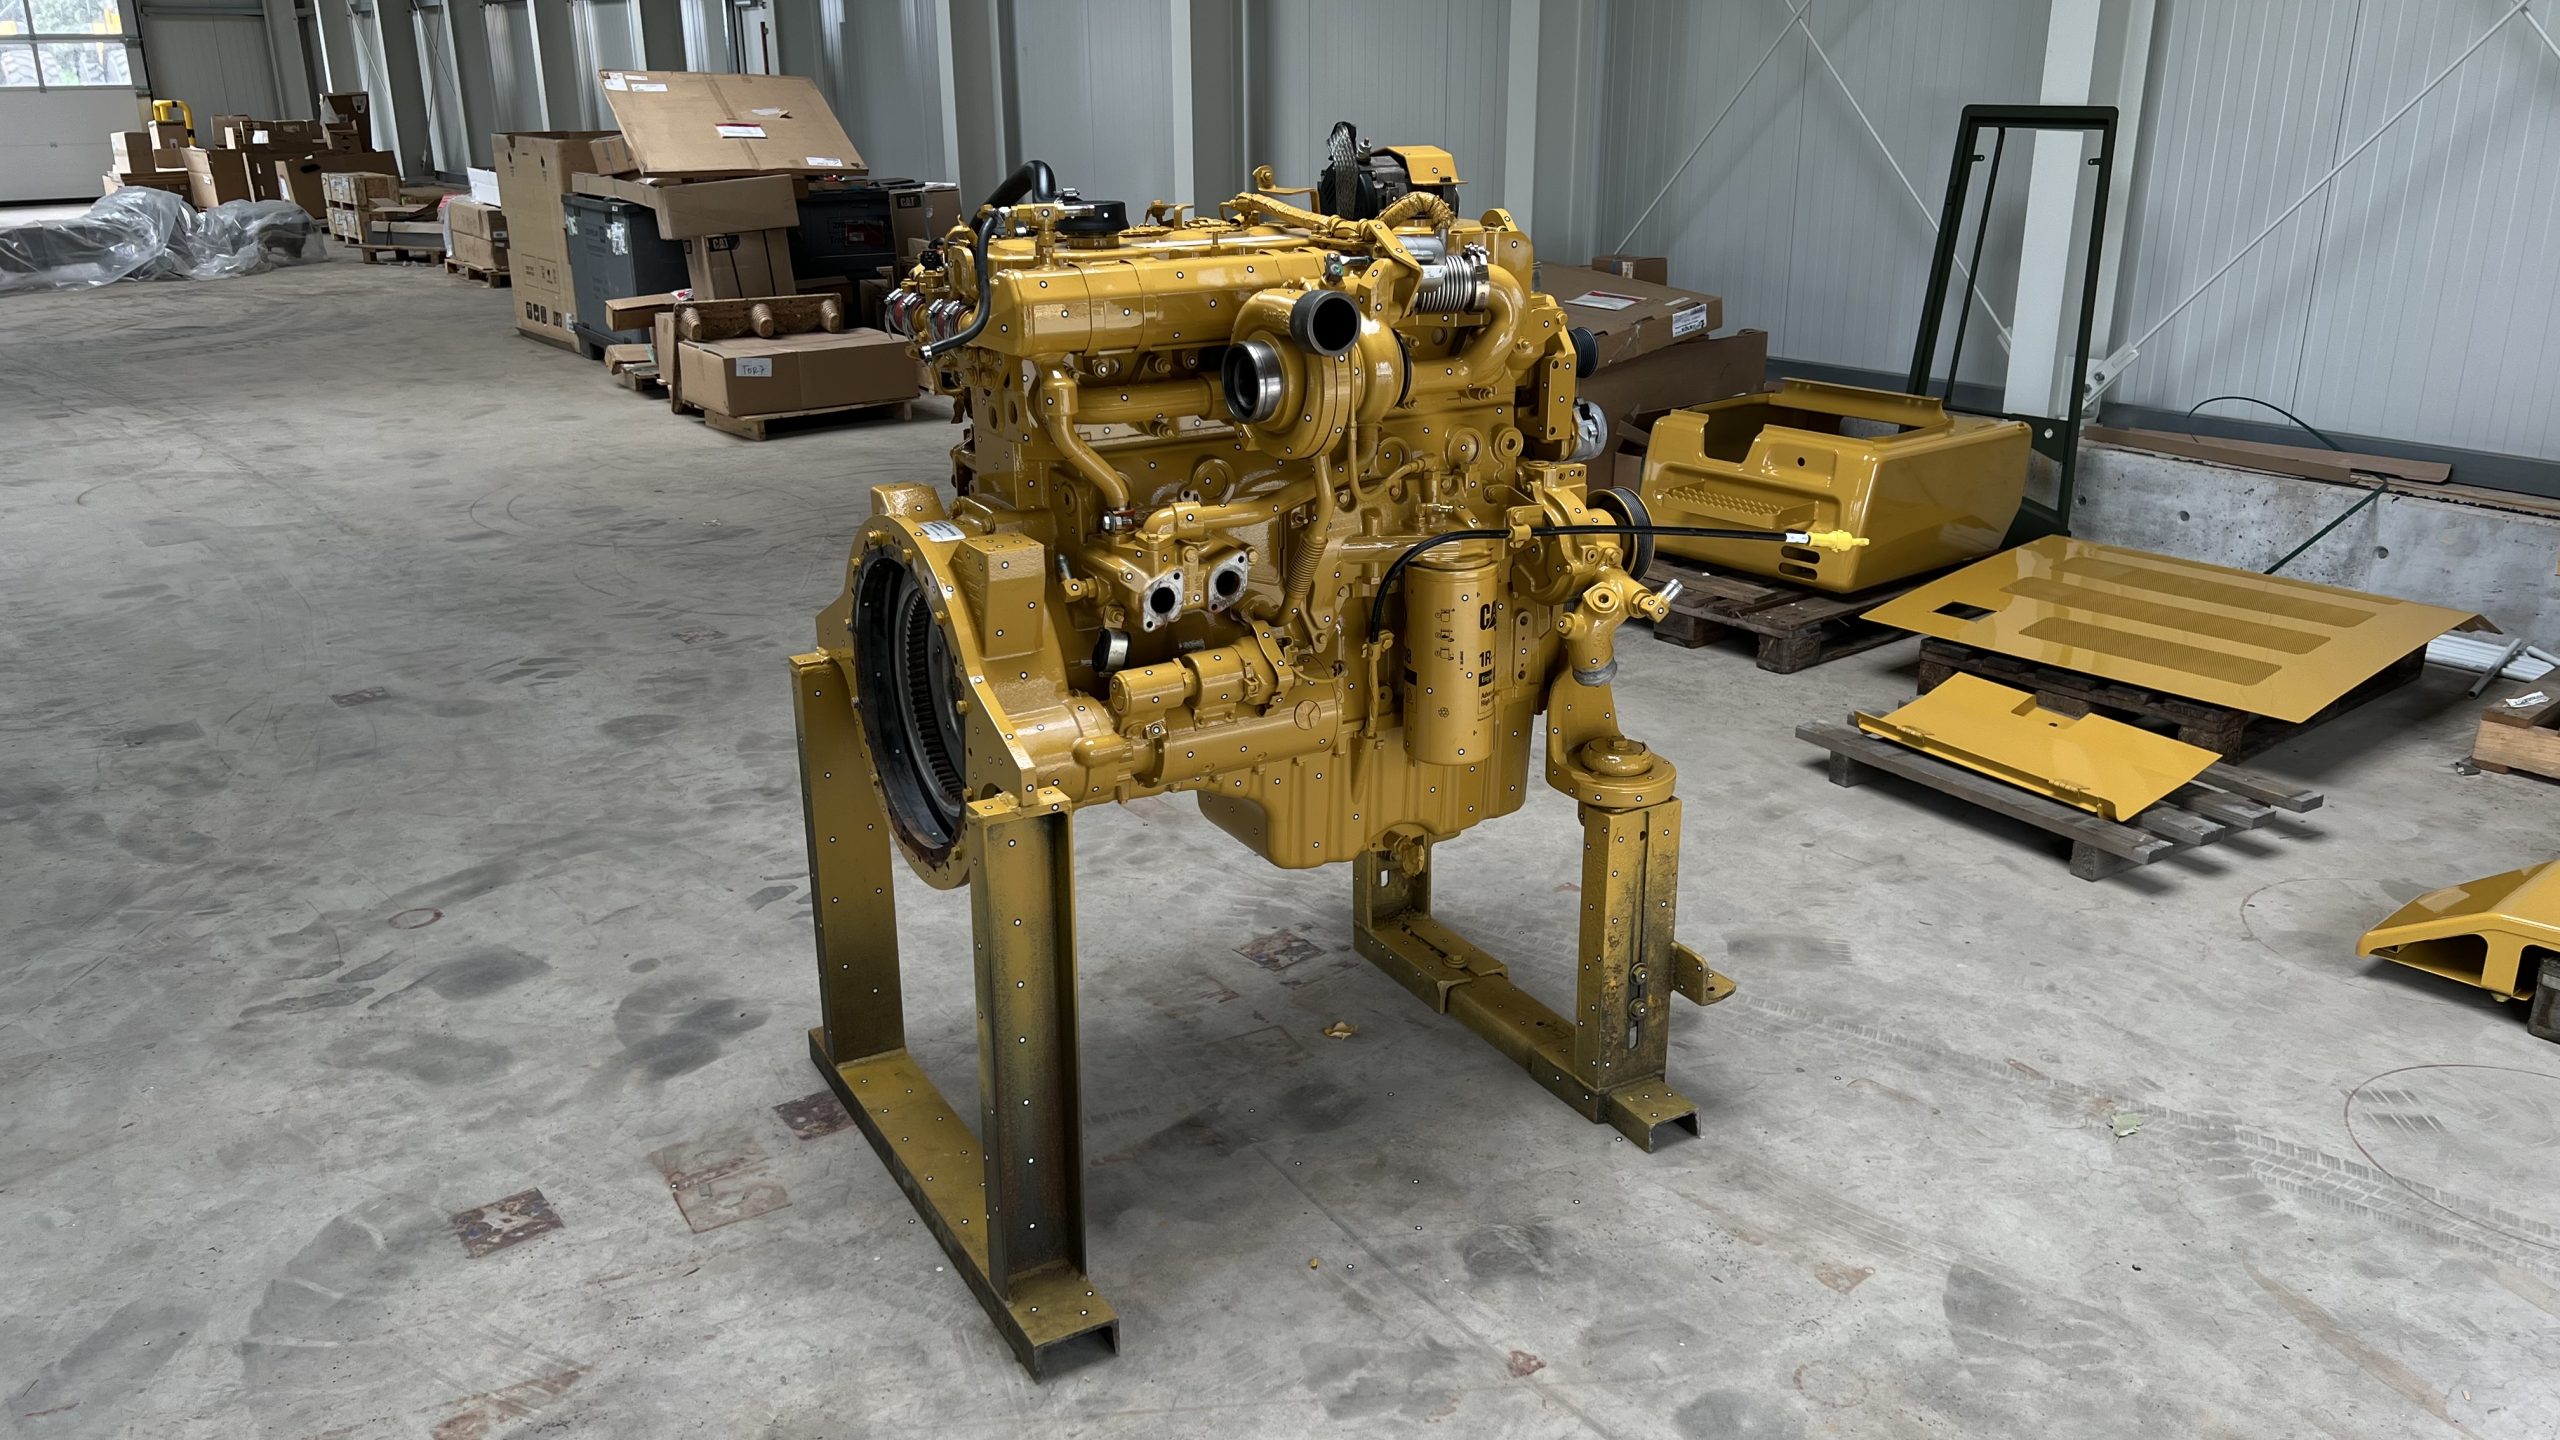 Gold-colored engine block on a trolley mount standing on the concrete floor of a hall. Cardboard boxes can be seen in the background.